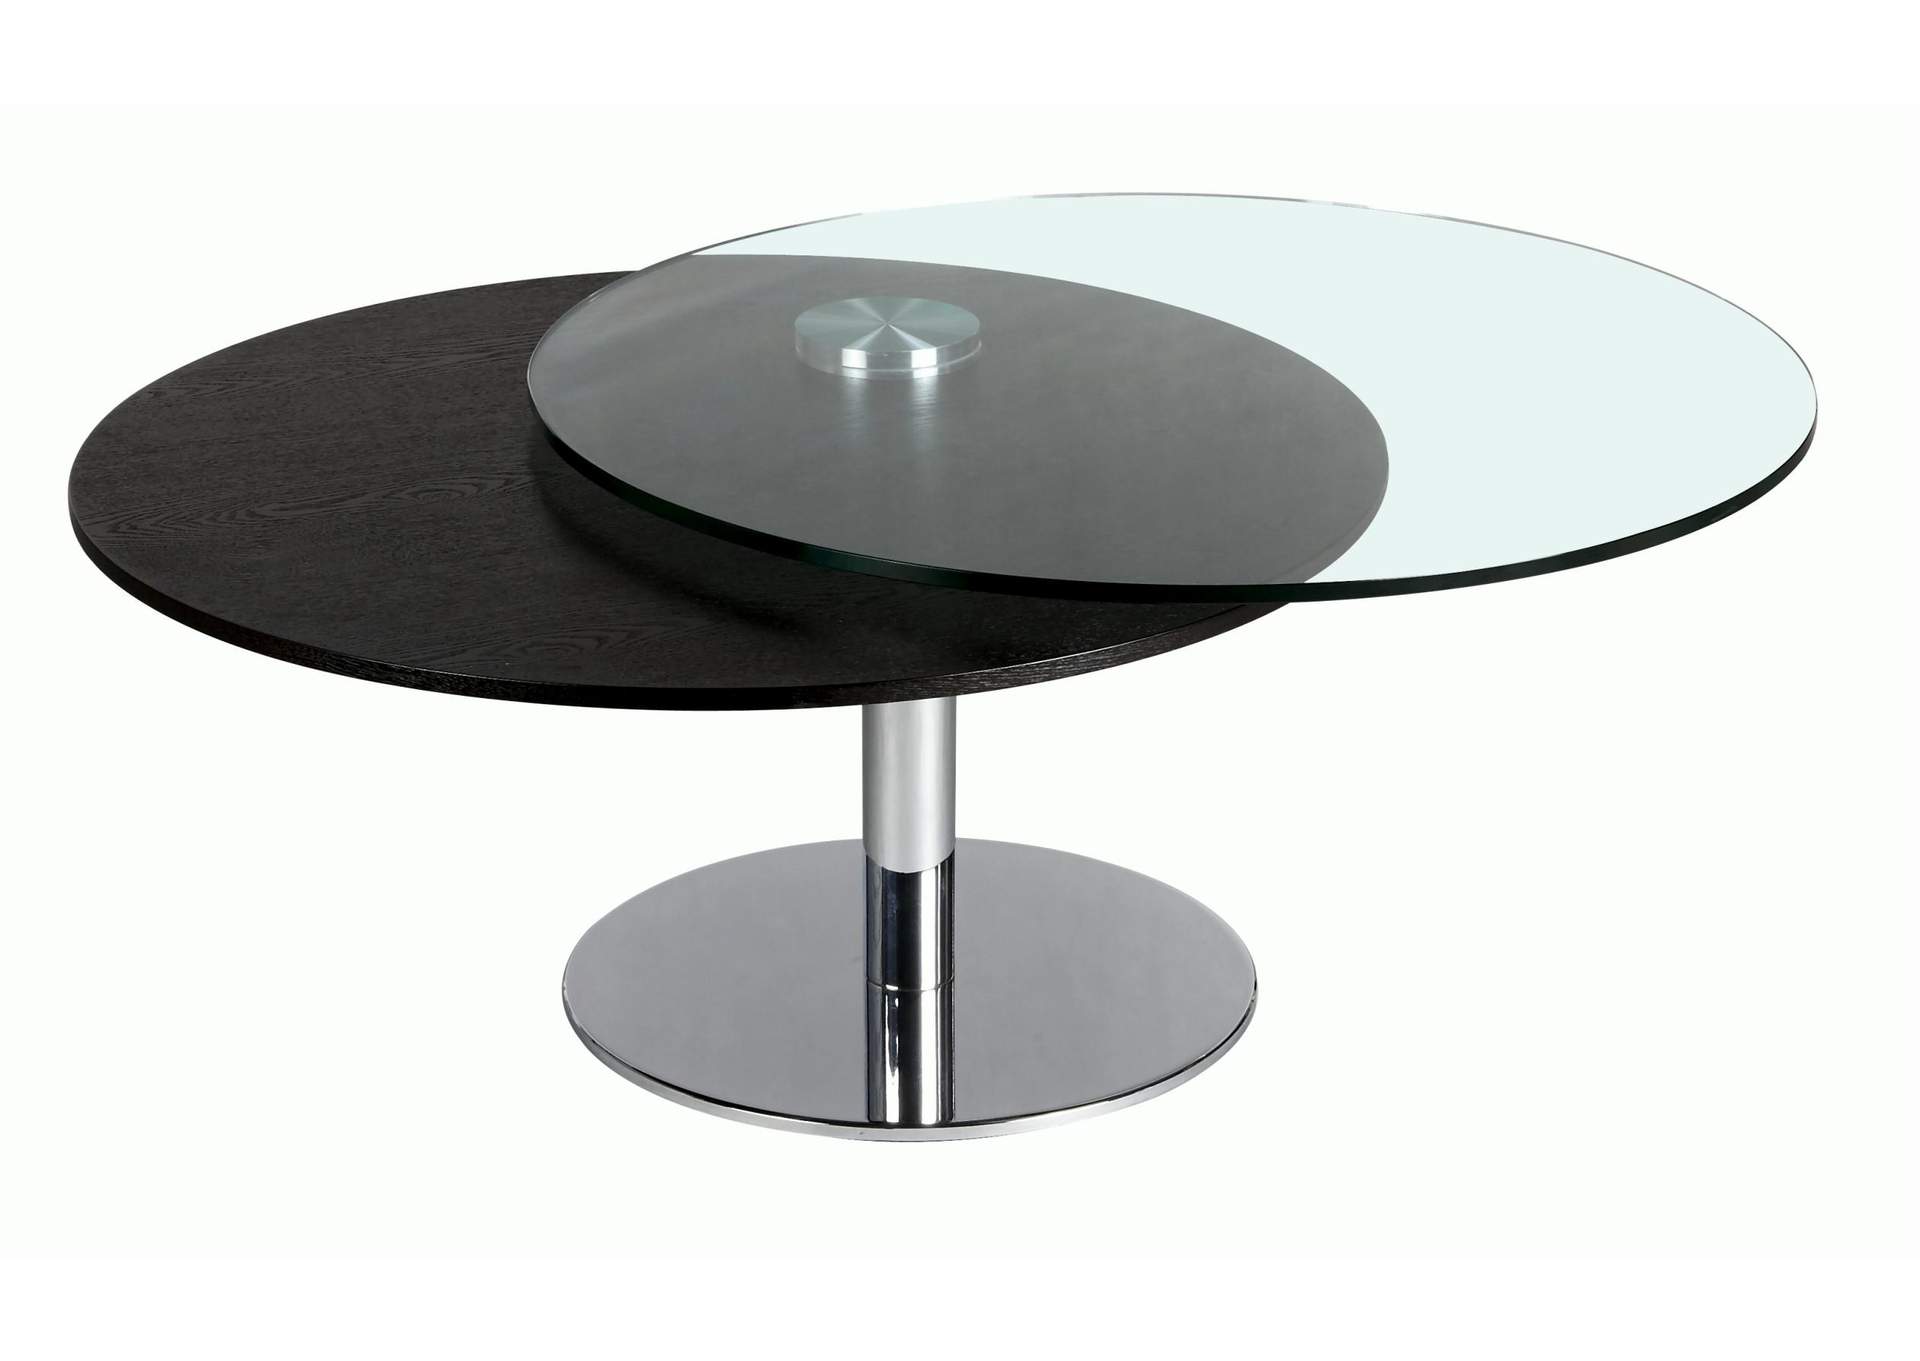 Contemporary Dual Round Top Motion Cocktail Table w/ Glass & Solid Wood Top,Chintaly Imports